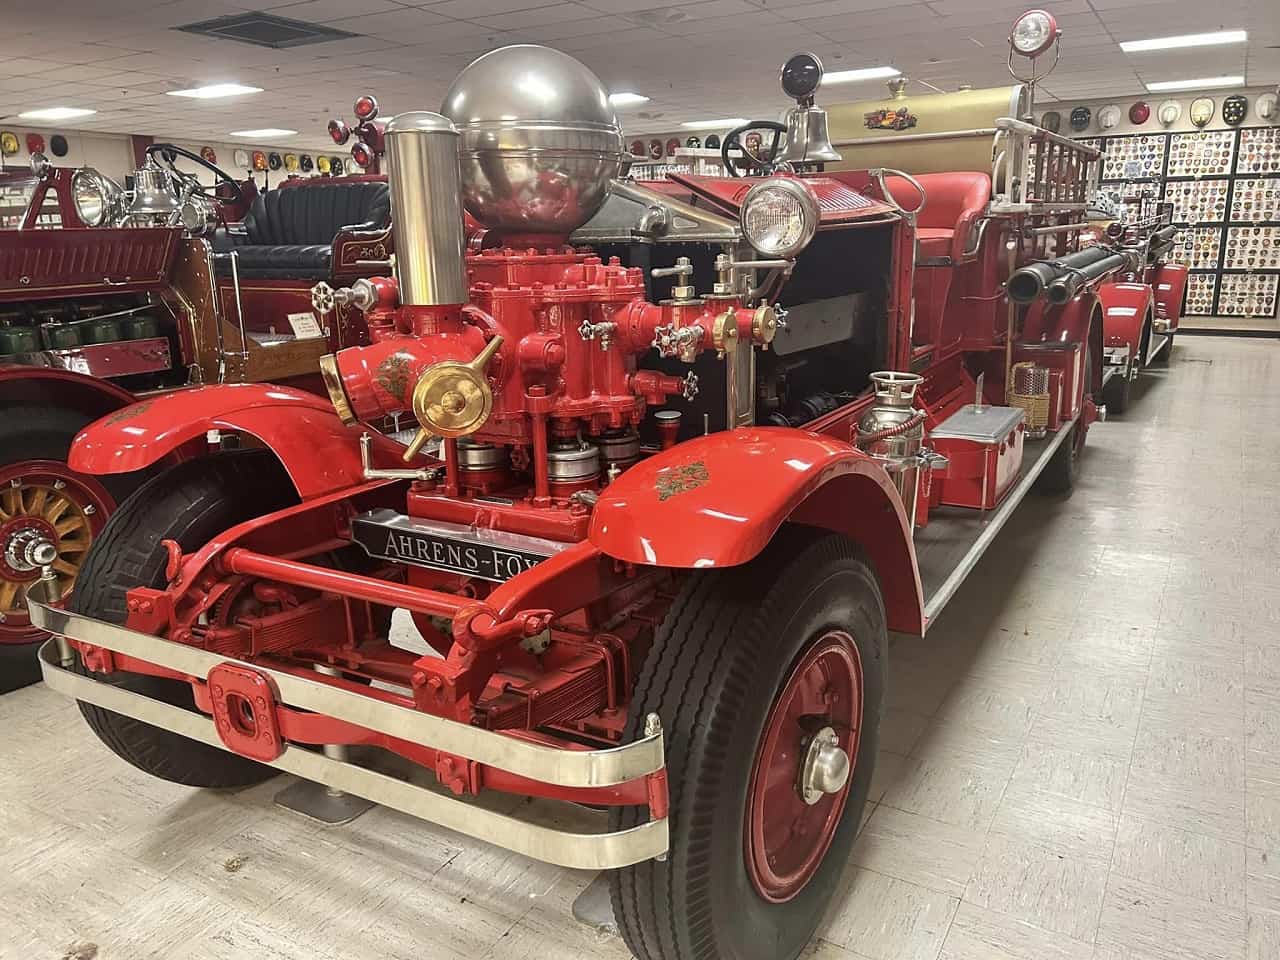 Oklahoma State Firefighters Museum